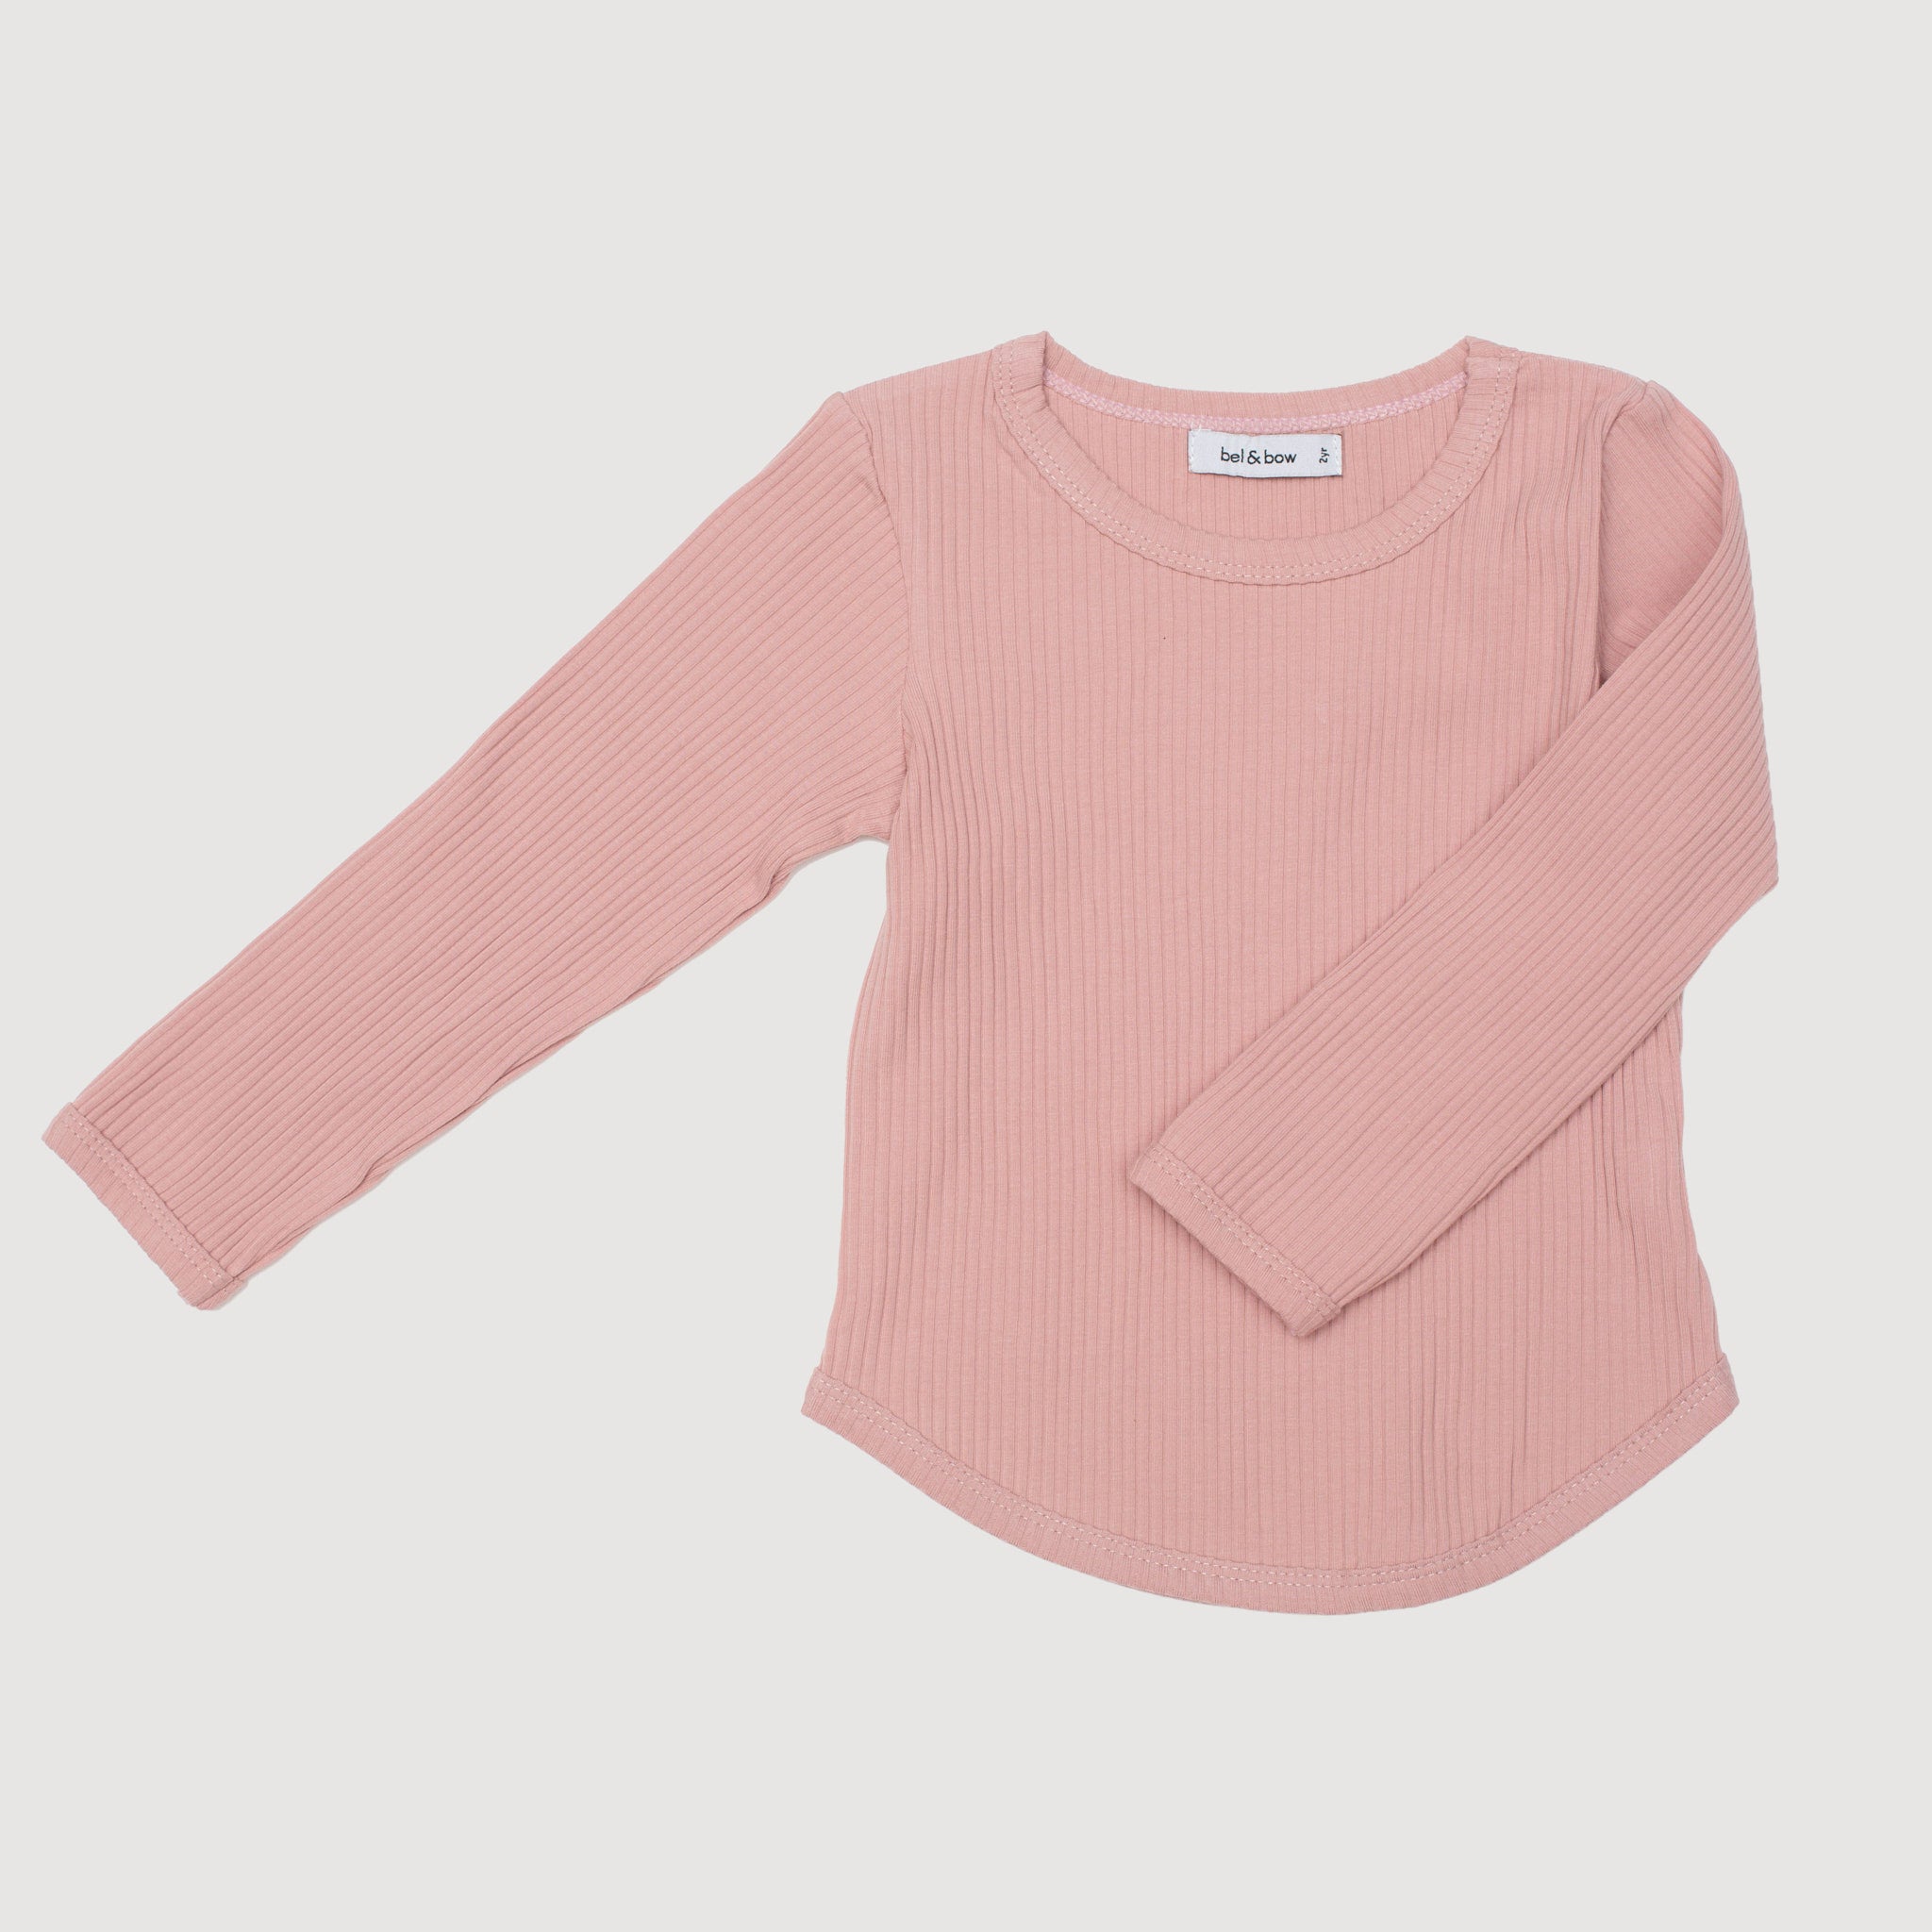 Ribbed Long Sleeve Top - Musk Pink bel & bow